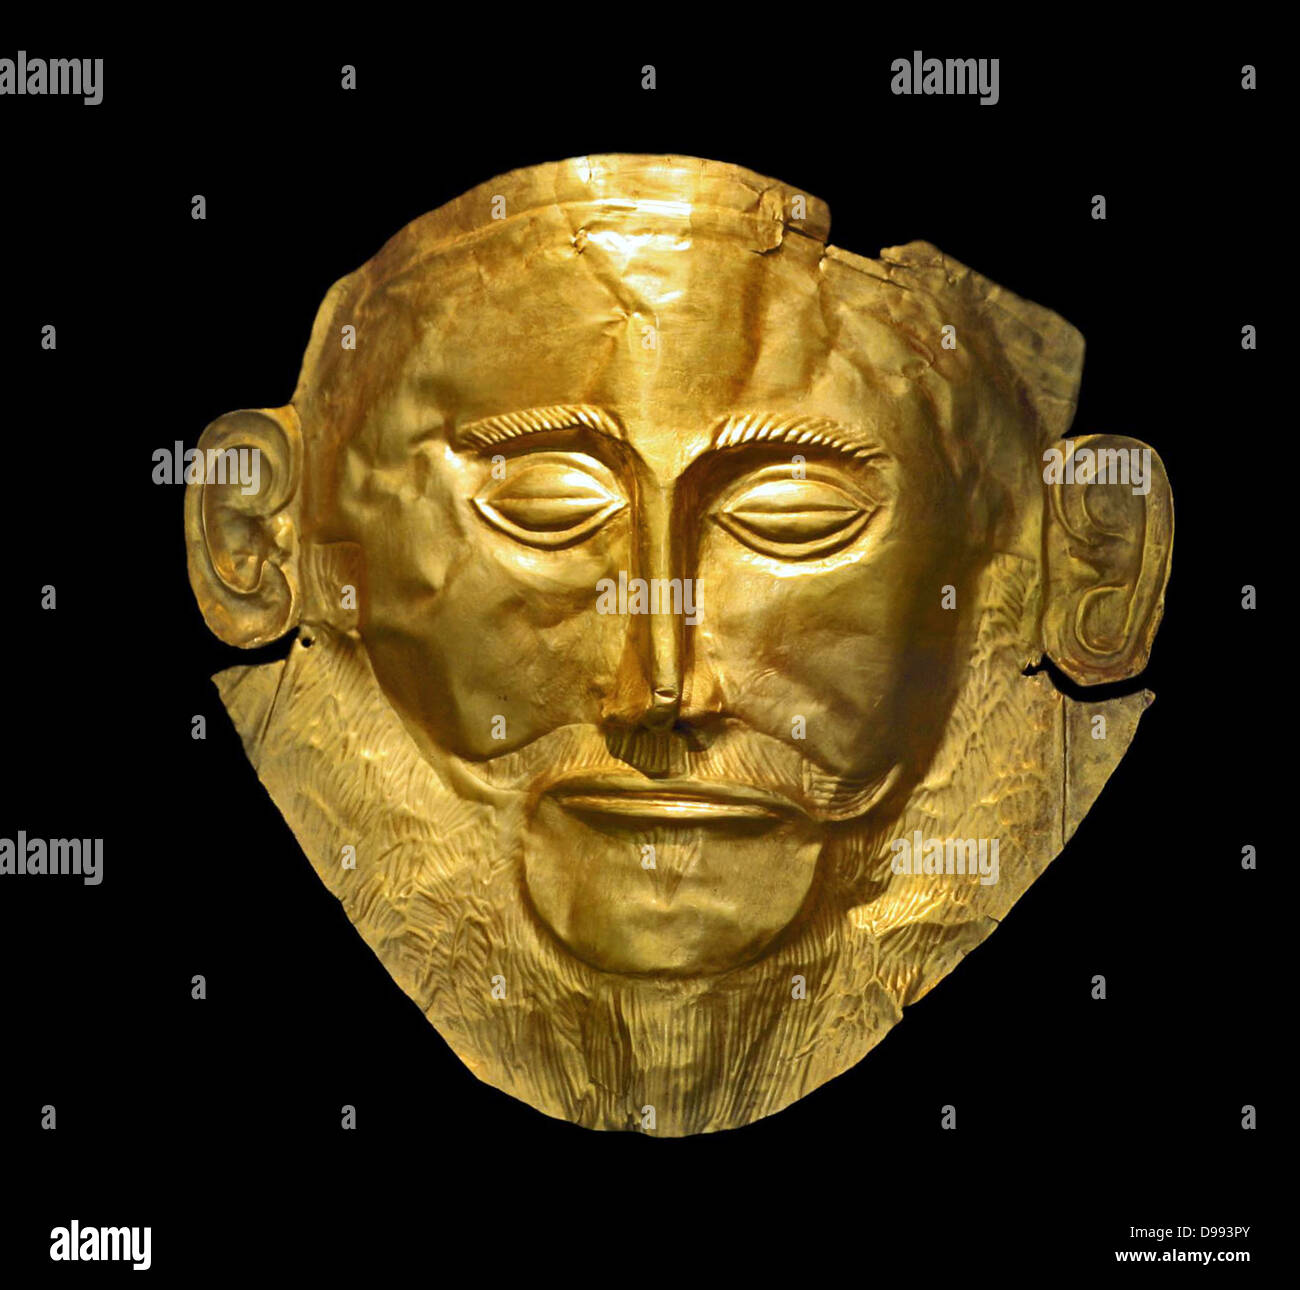 The Mask of Agamemnon discovered at Mycenae in 1876 by Heinrich Schliemann. The mask is a gold funeral mask, found over the face of a body located in a burial shaft. Schliemann believed that he had discovered the body of the legendary Greek leader Agamemnon Stock Photo